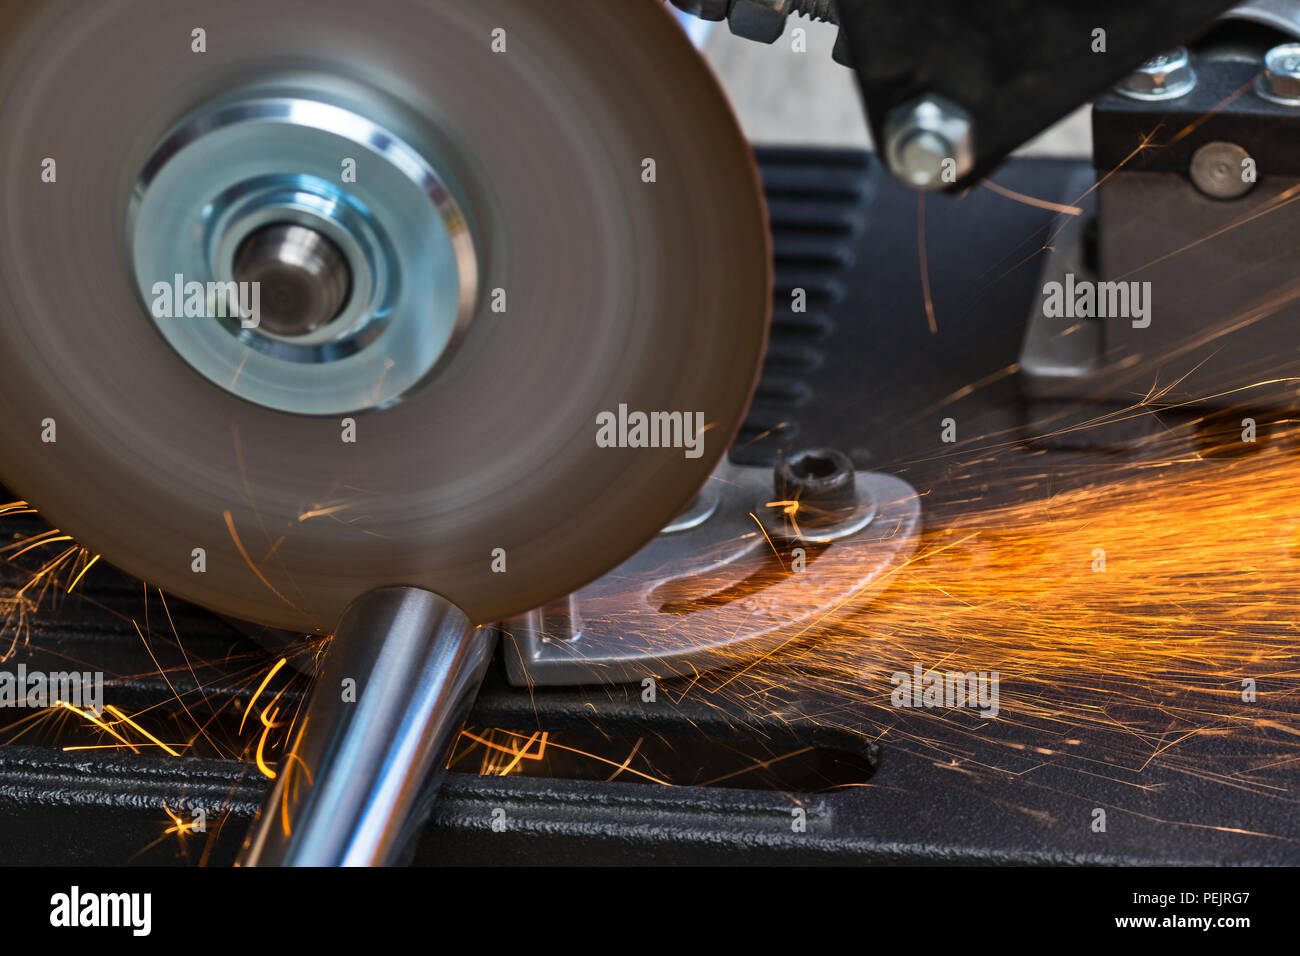 Cutting a metallic rod by a circular saw machine. Close-up of hot flying sparks when sawing a steel workpiece. Motion blur of disc with sharp blade. Stock Photo